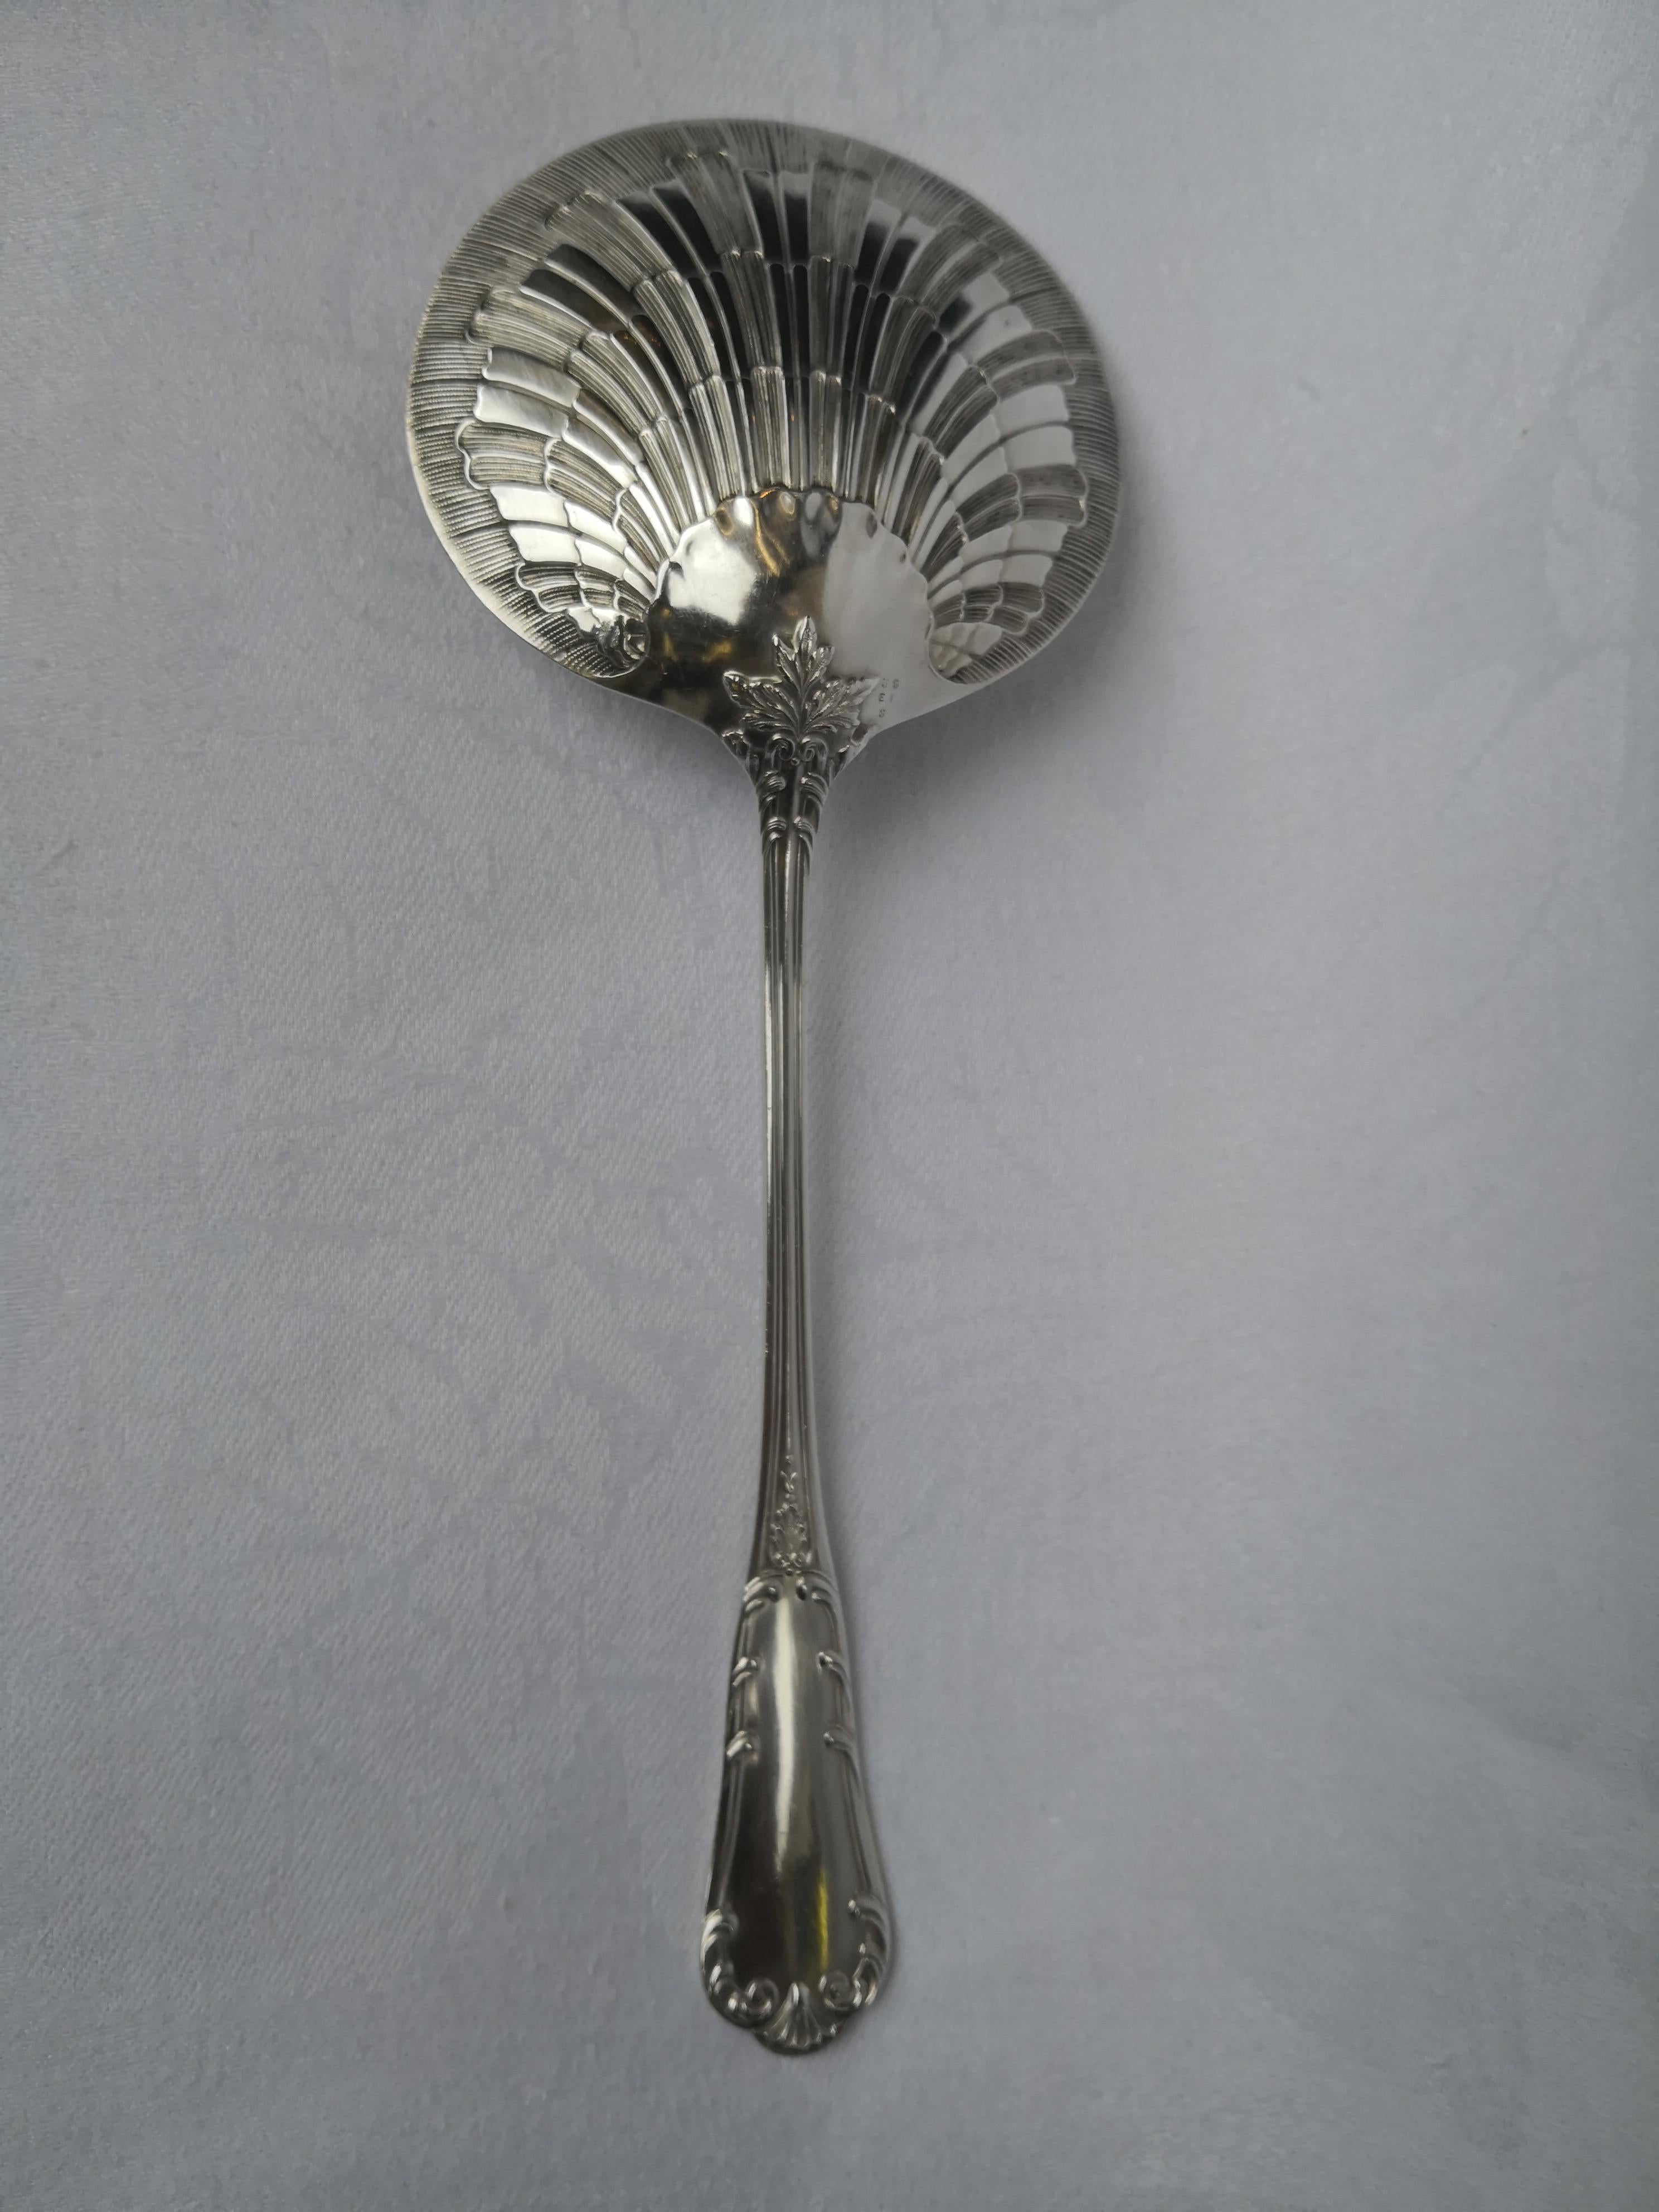 Large silver serving spoon formed to a detailed naturalistic scallop. French Minerva hallmark for 950 silver. Comes in original box stamped Am. Tallies Paris. Period Belle Époque. Beautiful jeweler for the table.
The spoon is 23 cm long and diamter